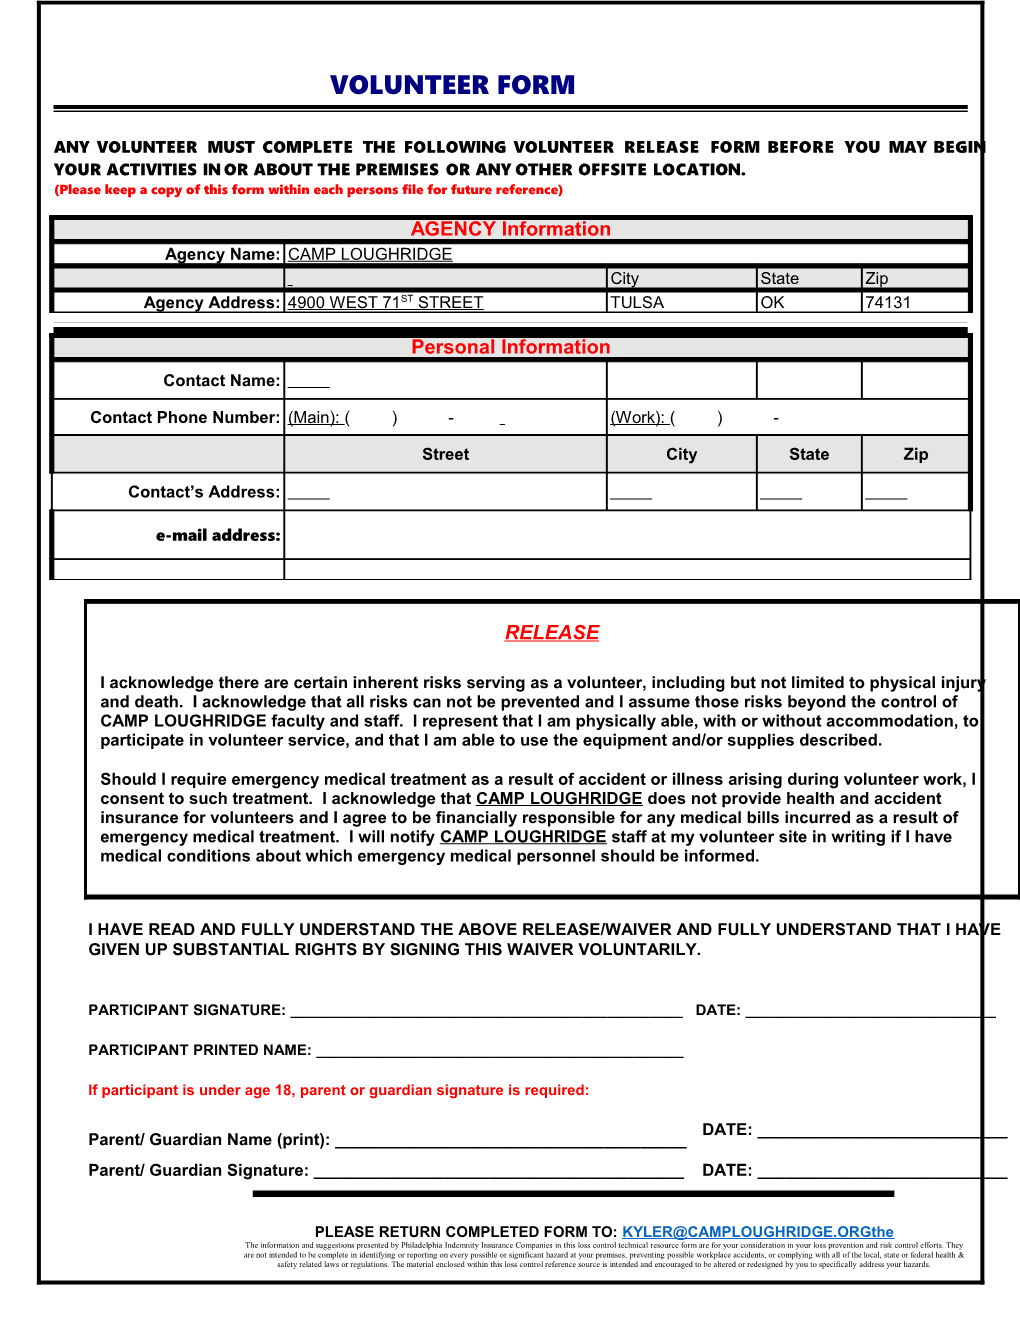 Please Keep a Copy of This Form Within Each Persons File for Future Reference